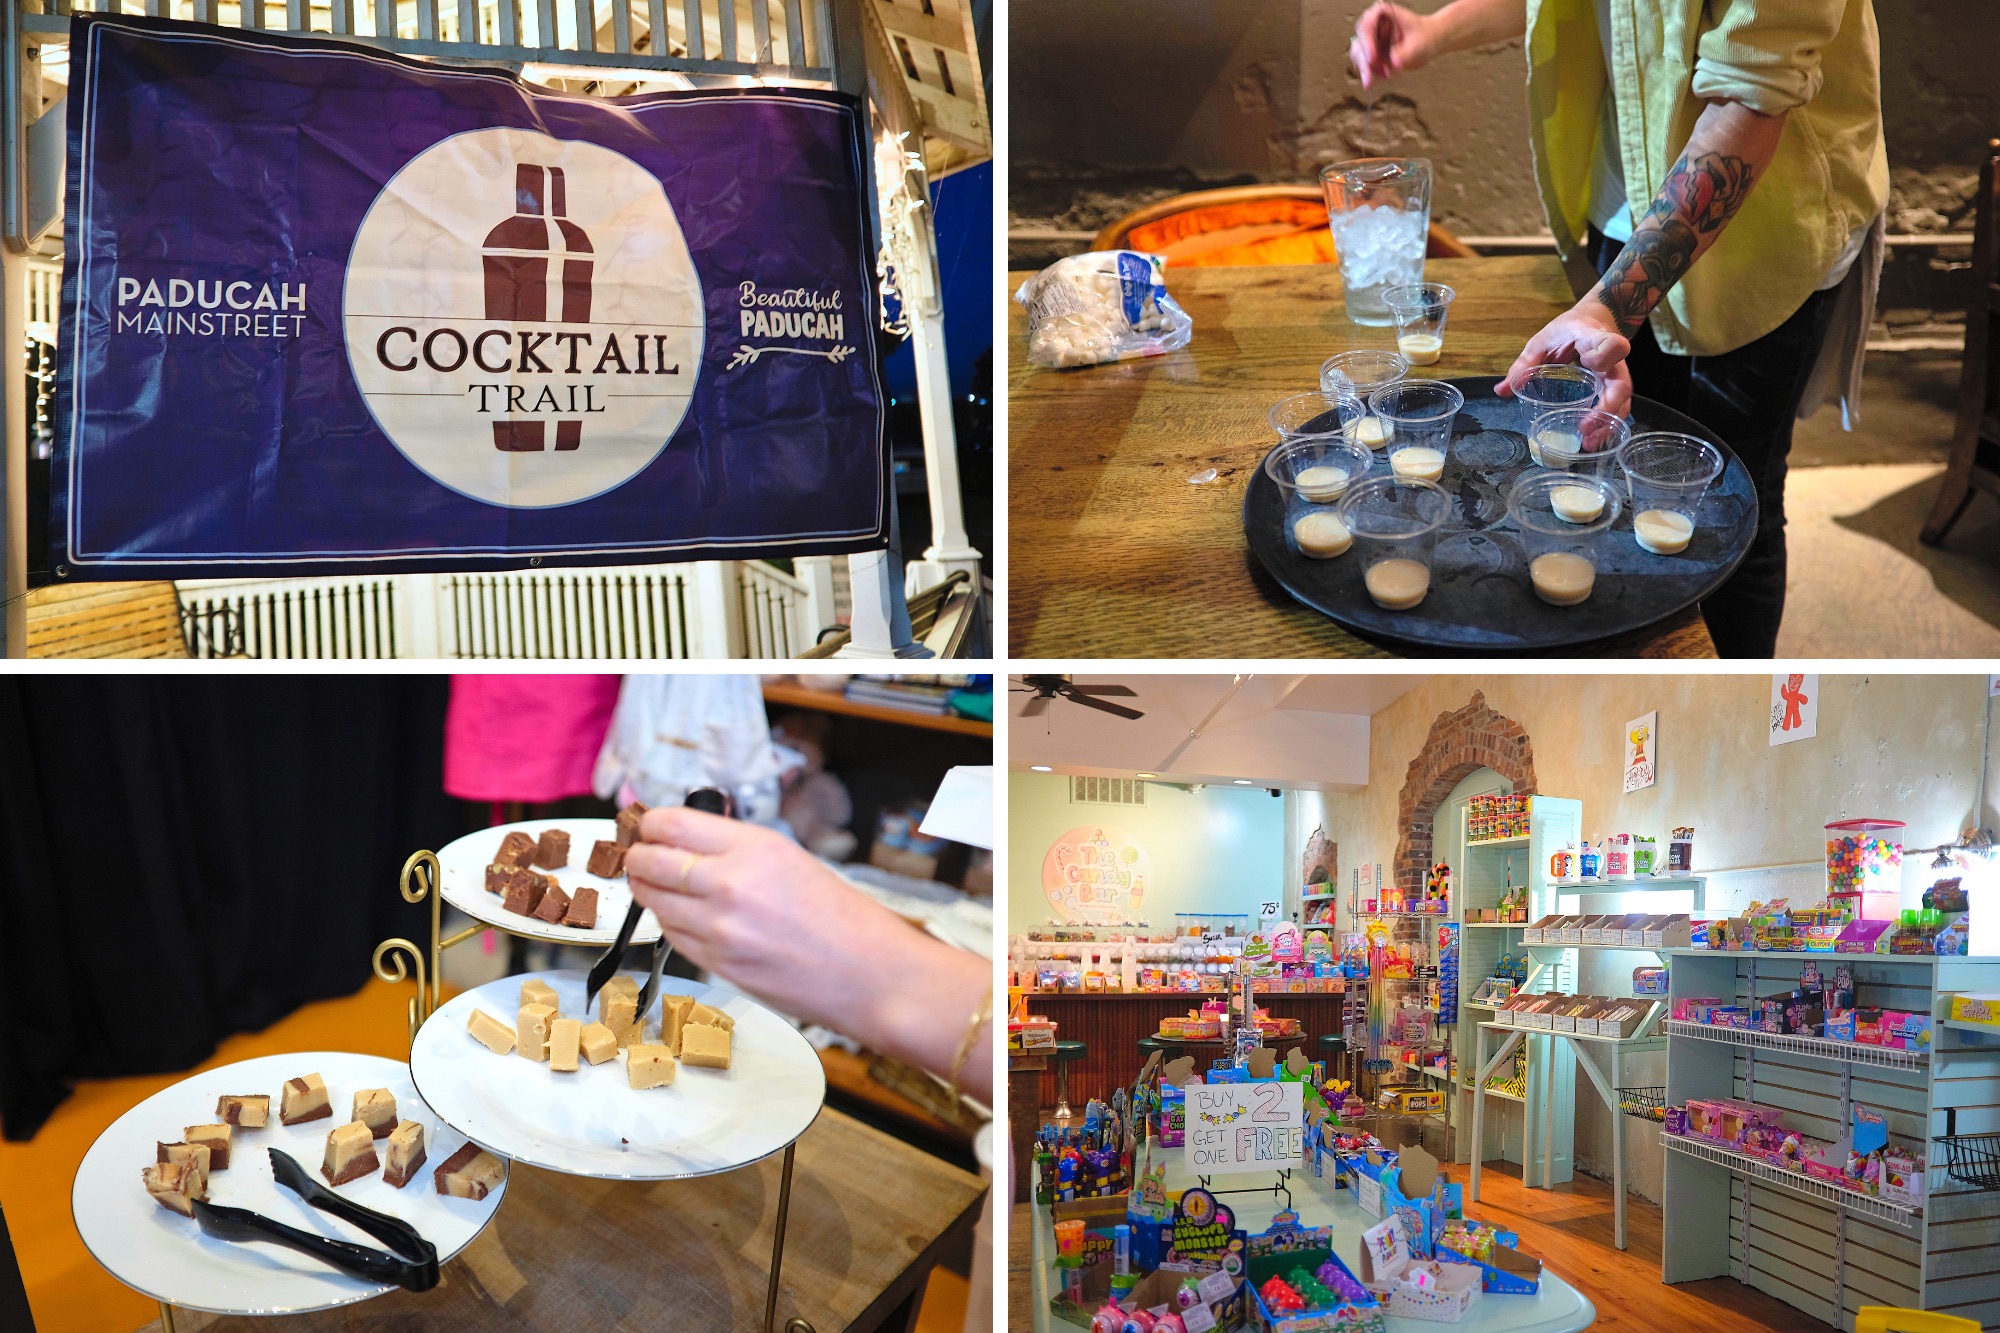 A collage of photos taken during the Cocktail Trail event